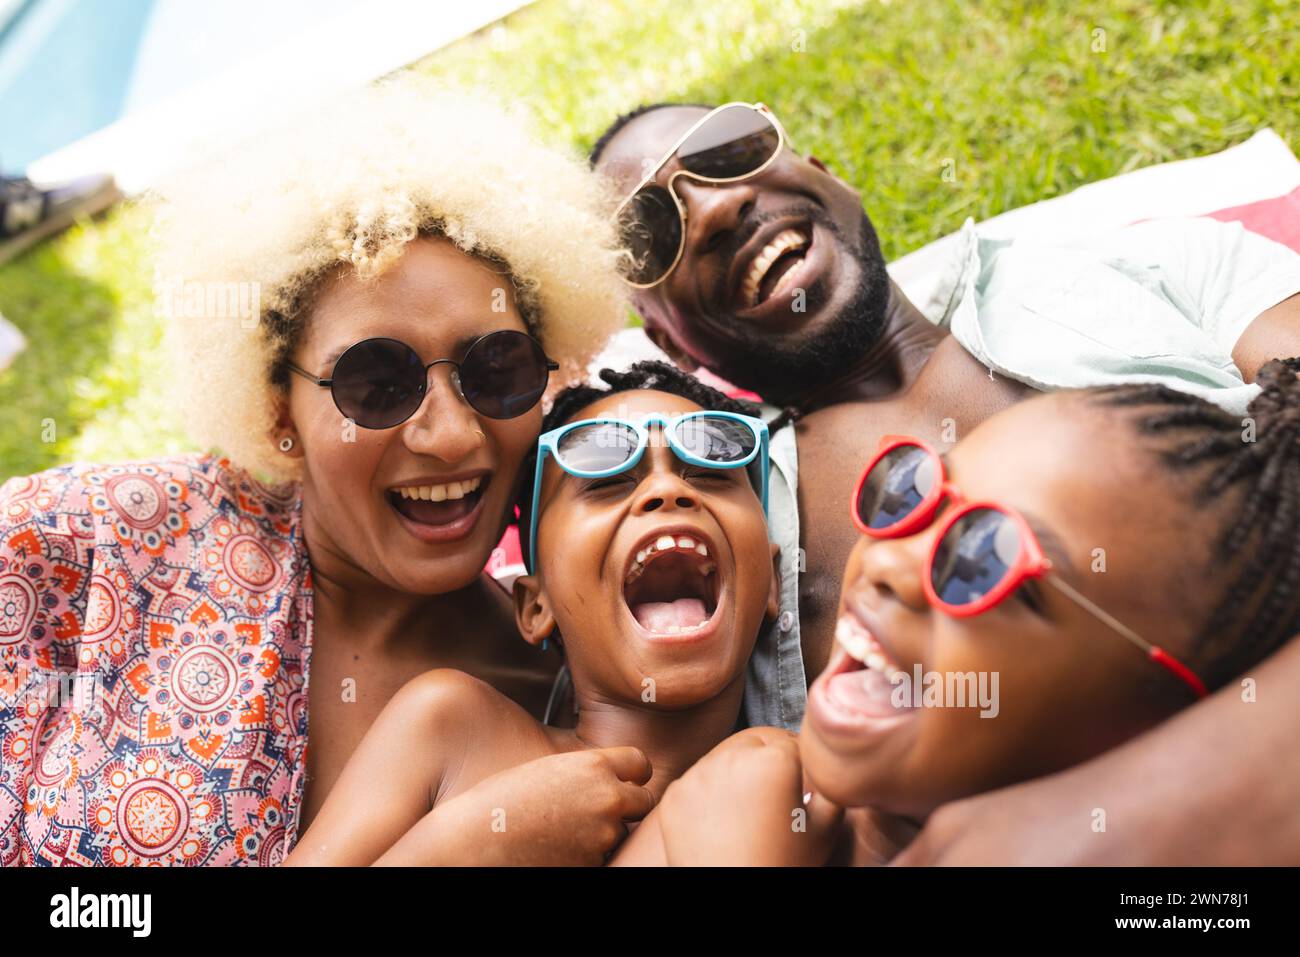 Family of four shares a sunny selfie moment outdoors. Stock Photo